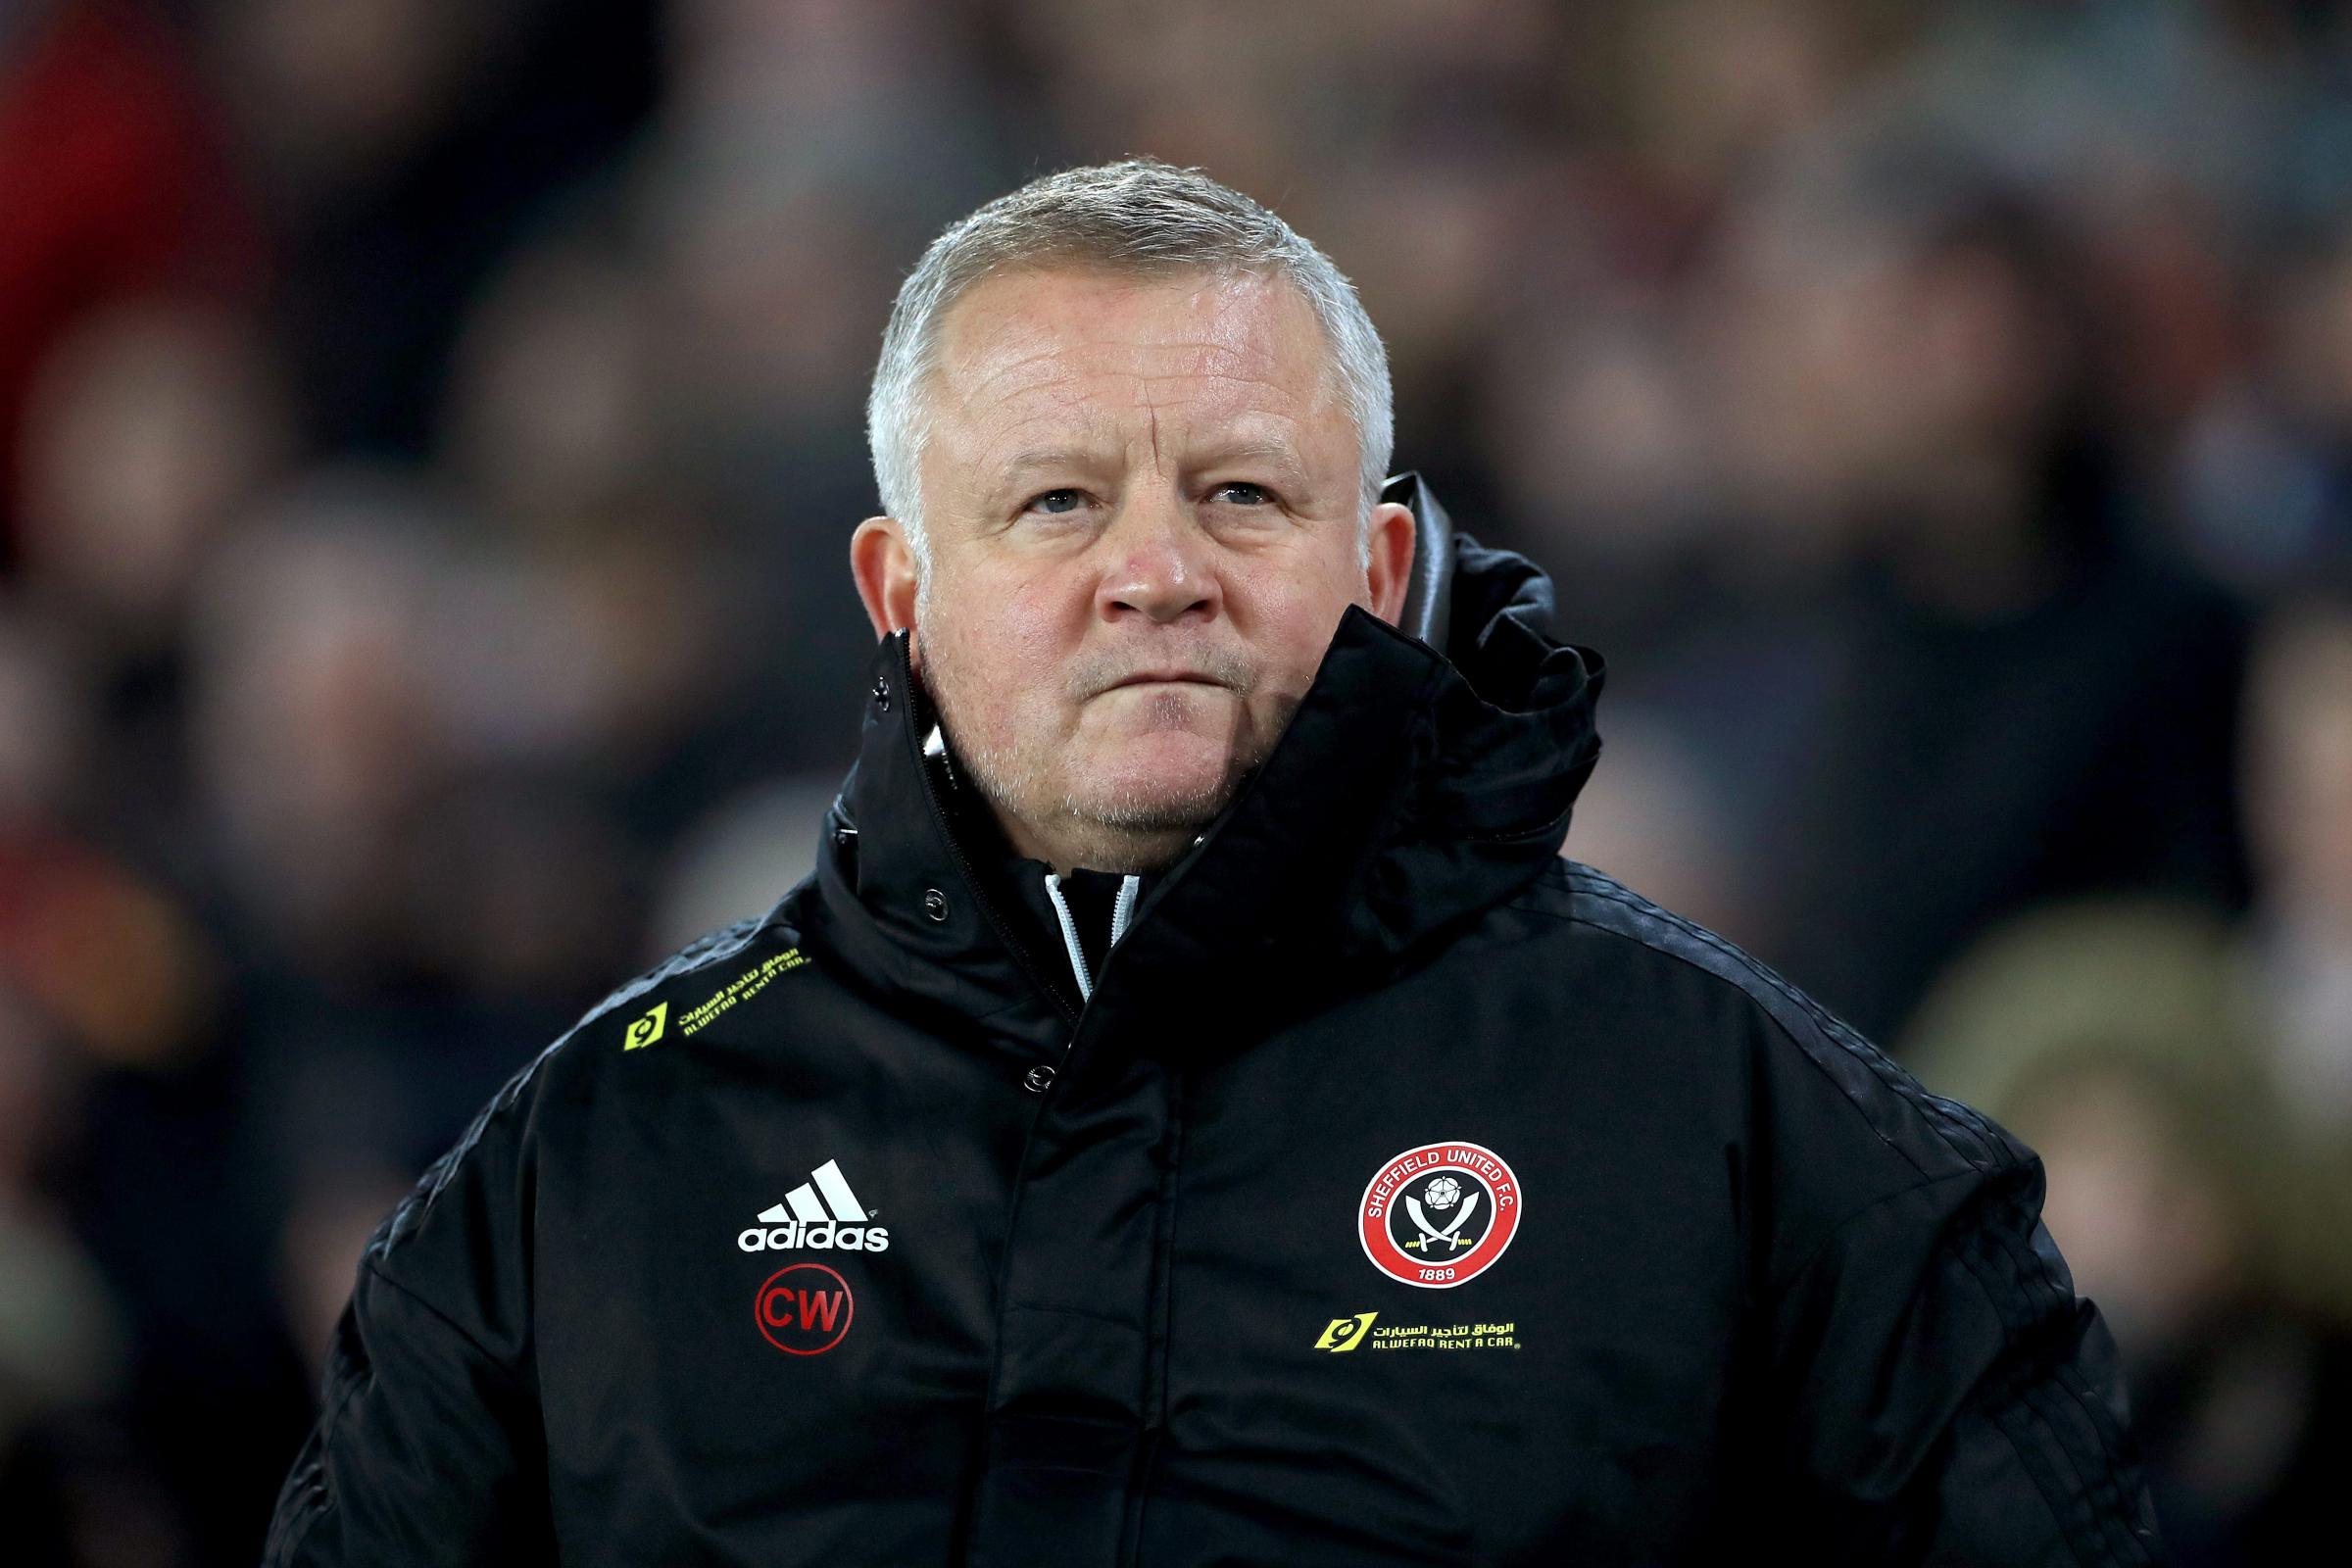 Former Sheffield United manager Chris Wilder set to take over as Boro manager